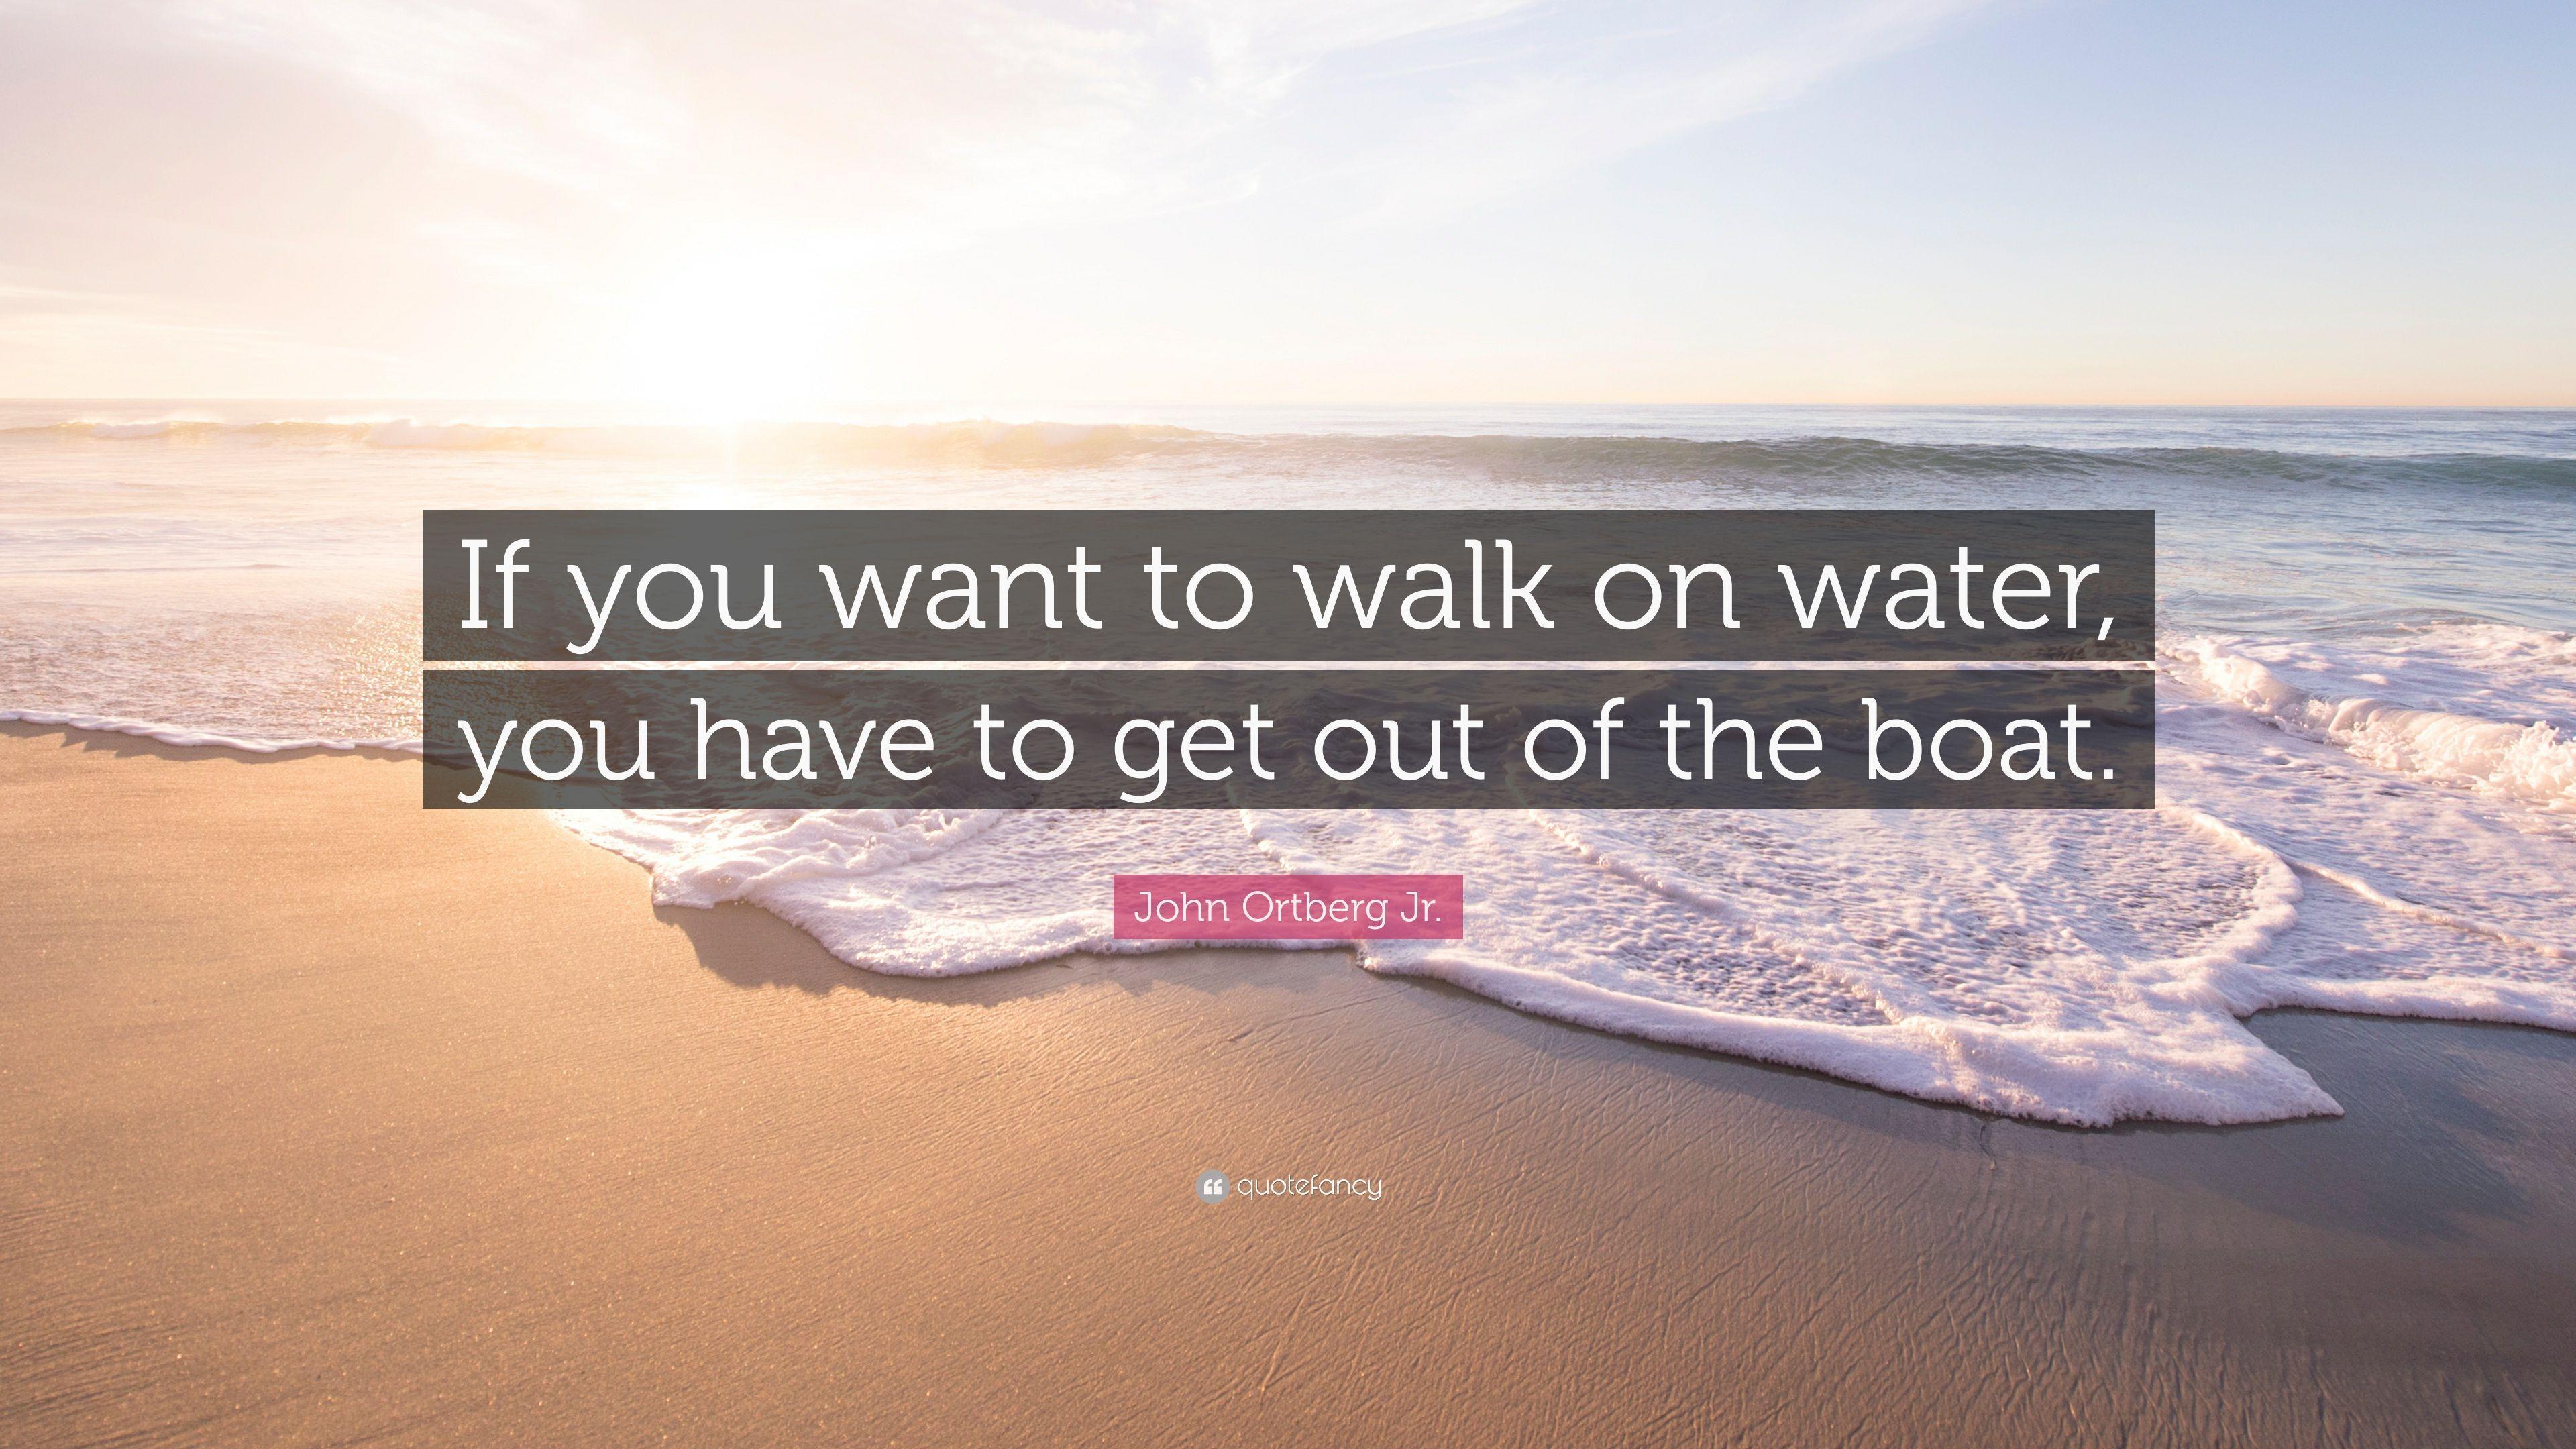 Quote: "If you want to walk on water, you have to 